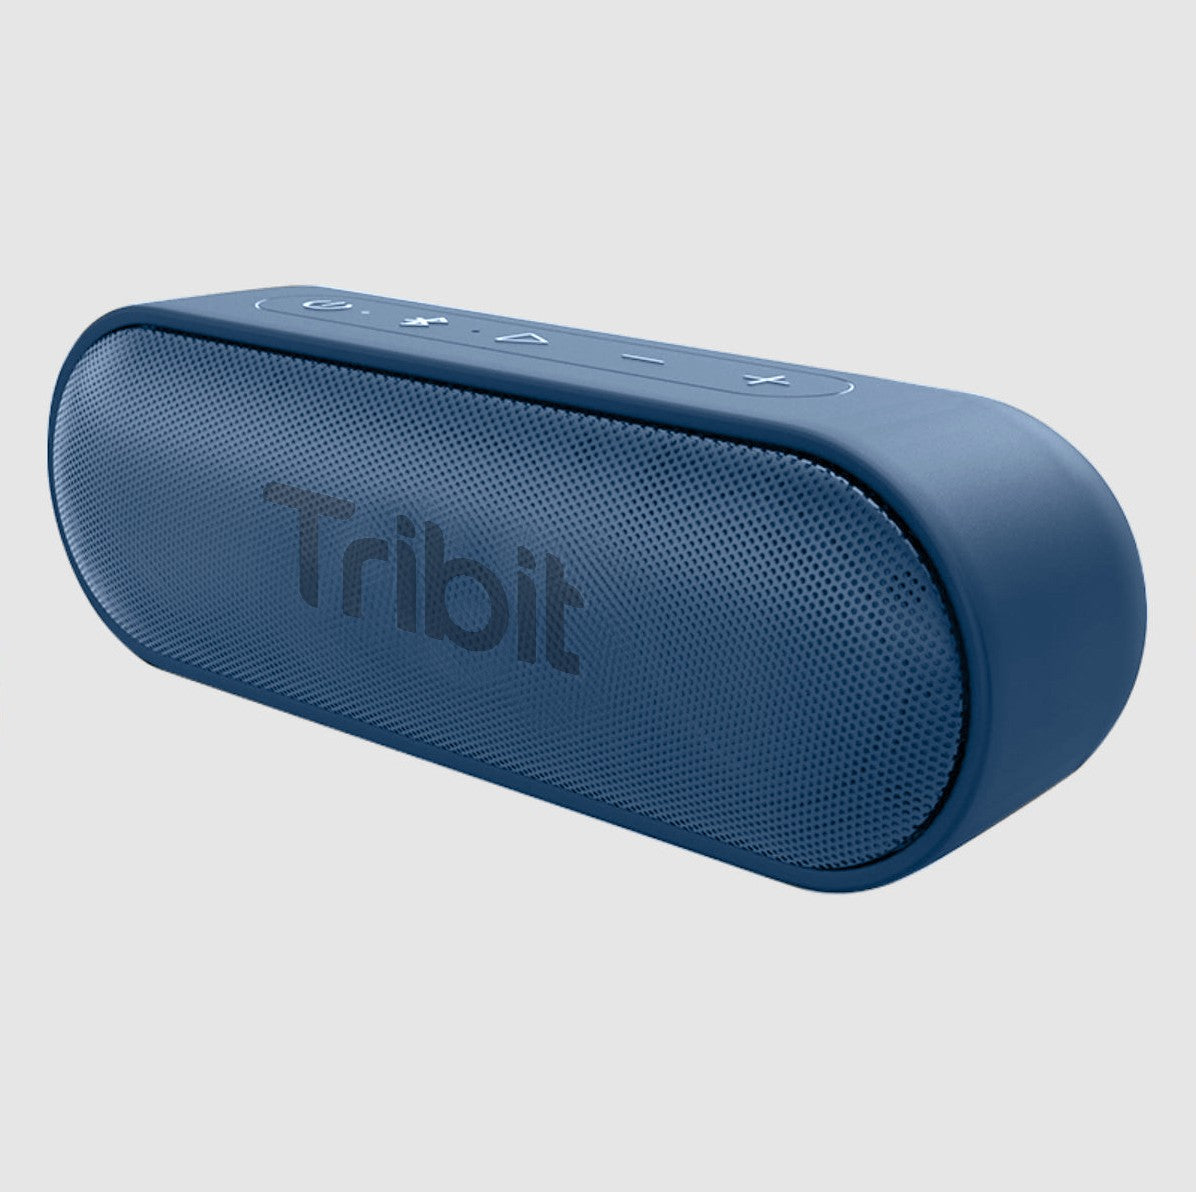 Tribit XSound Go Portable Wireless Speaker with IPX7 Waterproof 24h Playtime Bluetooth 5.0 100ft Range 16W Loud Sound and Rich Bass BTS20